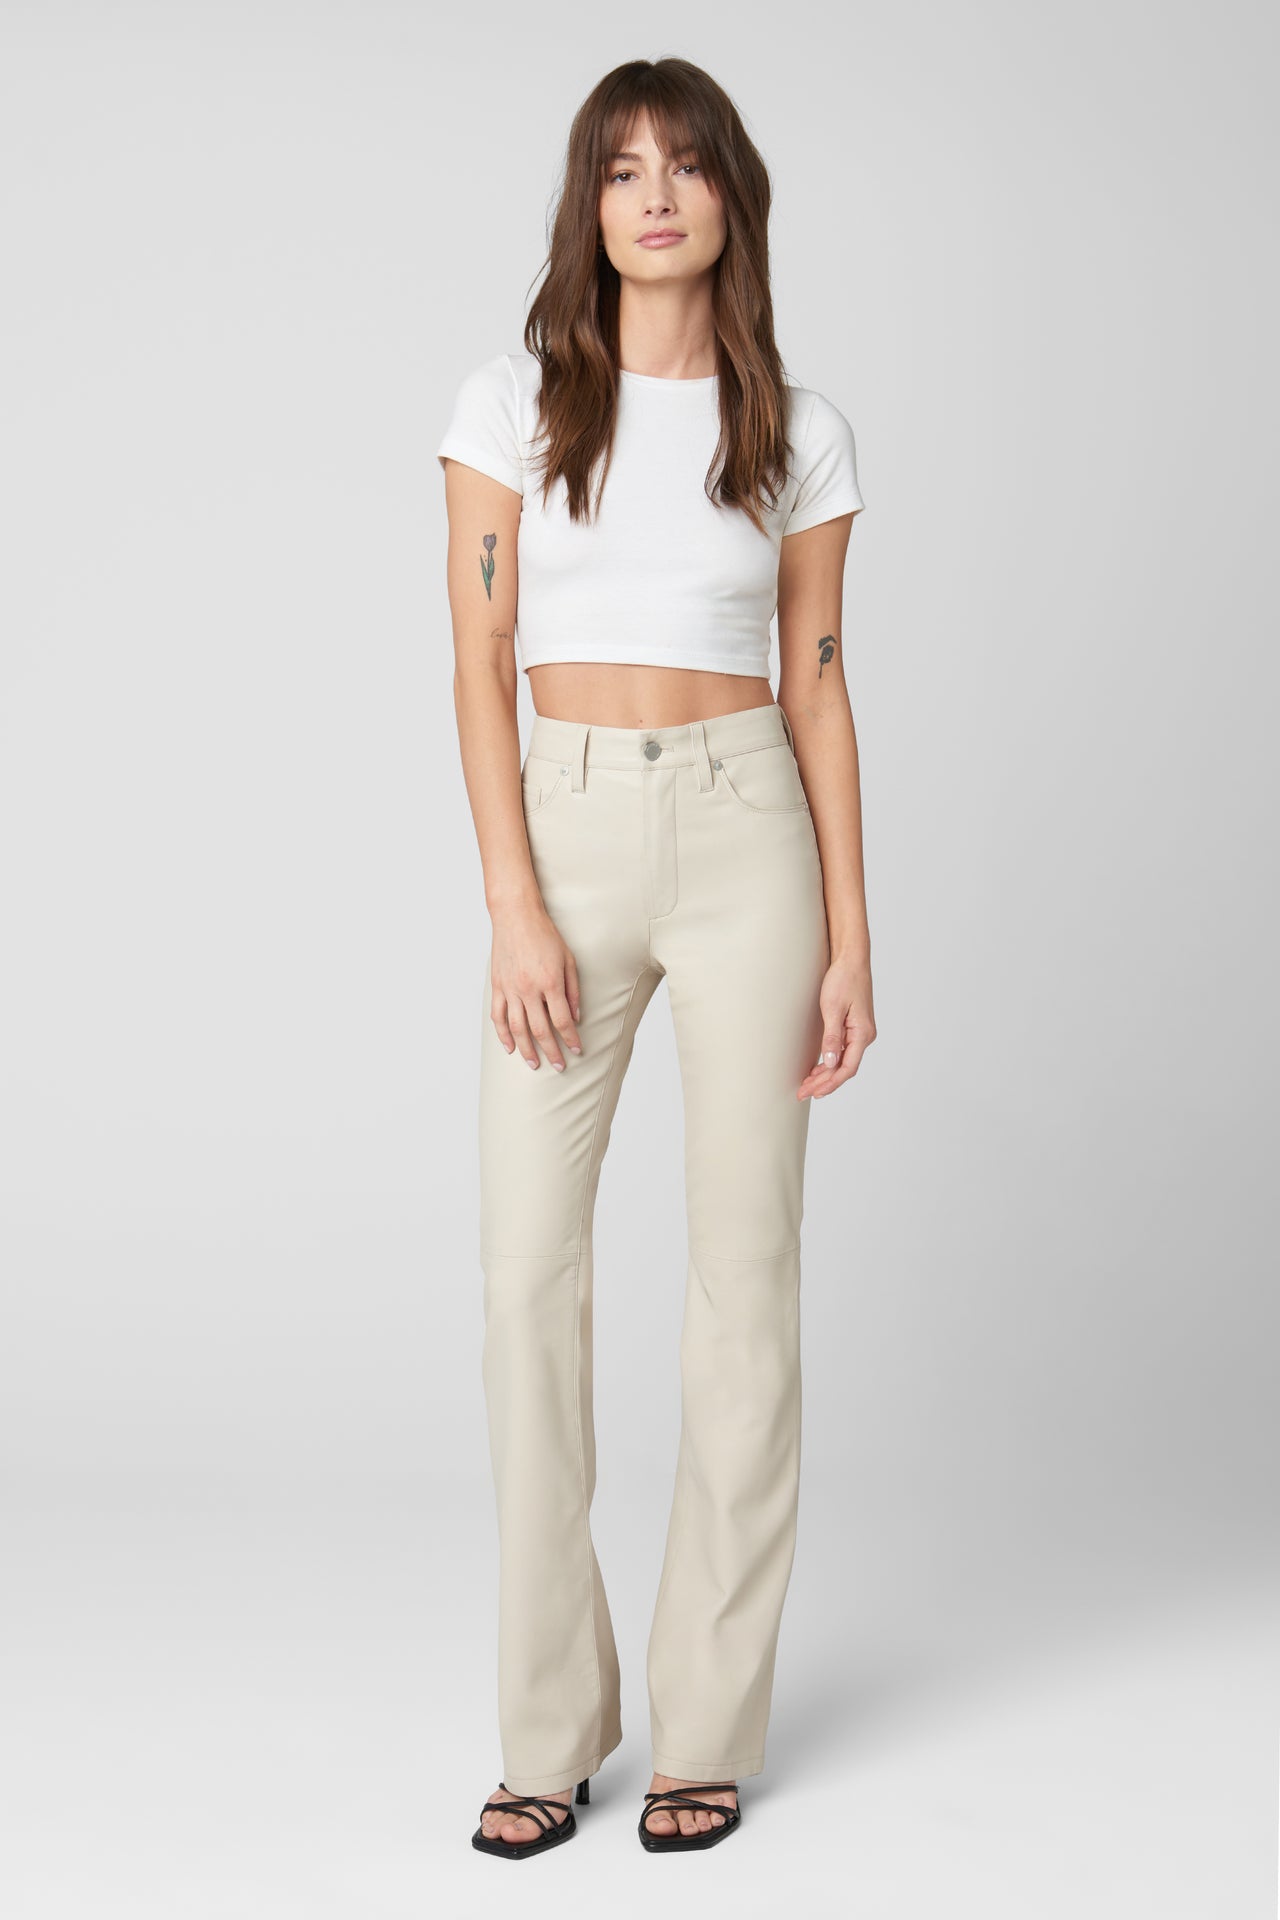 Go Blank PU Hoyt Mini Boot Cut Pant, Pant Bottom by Blank NYC | LIT Boutique